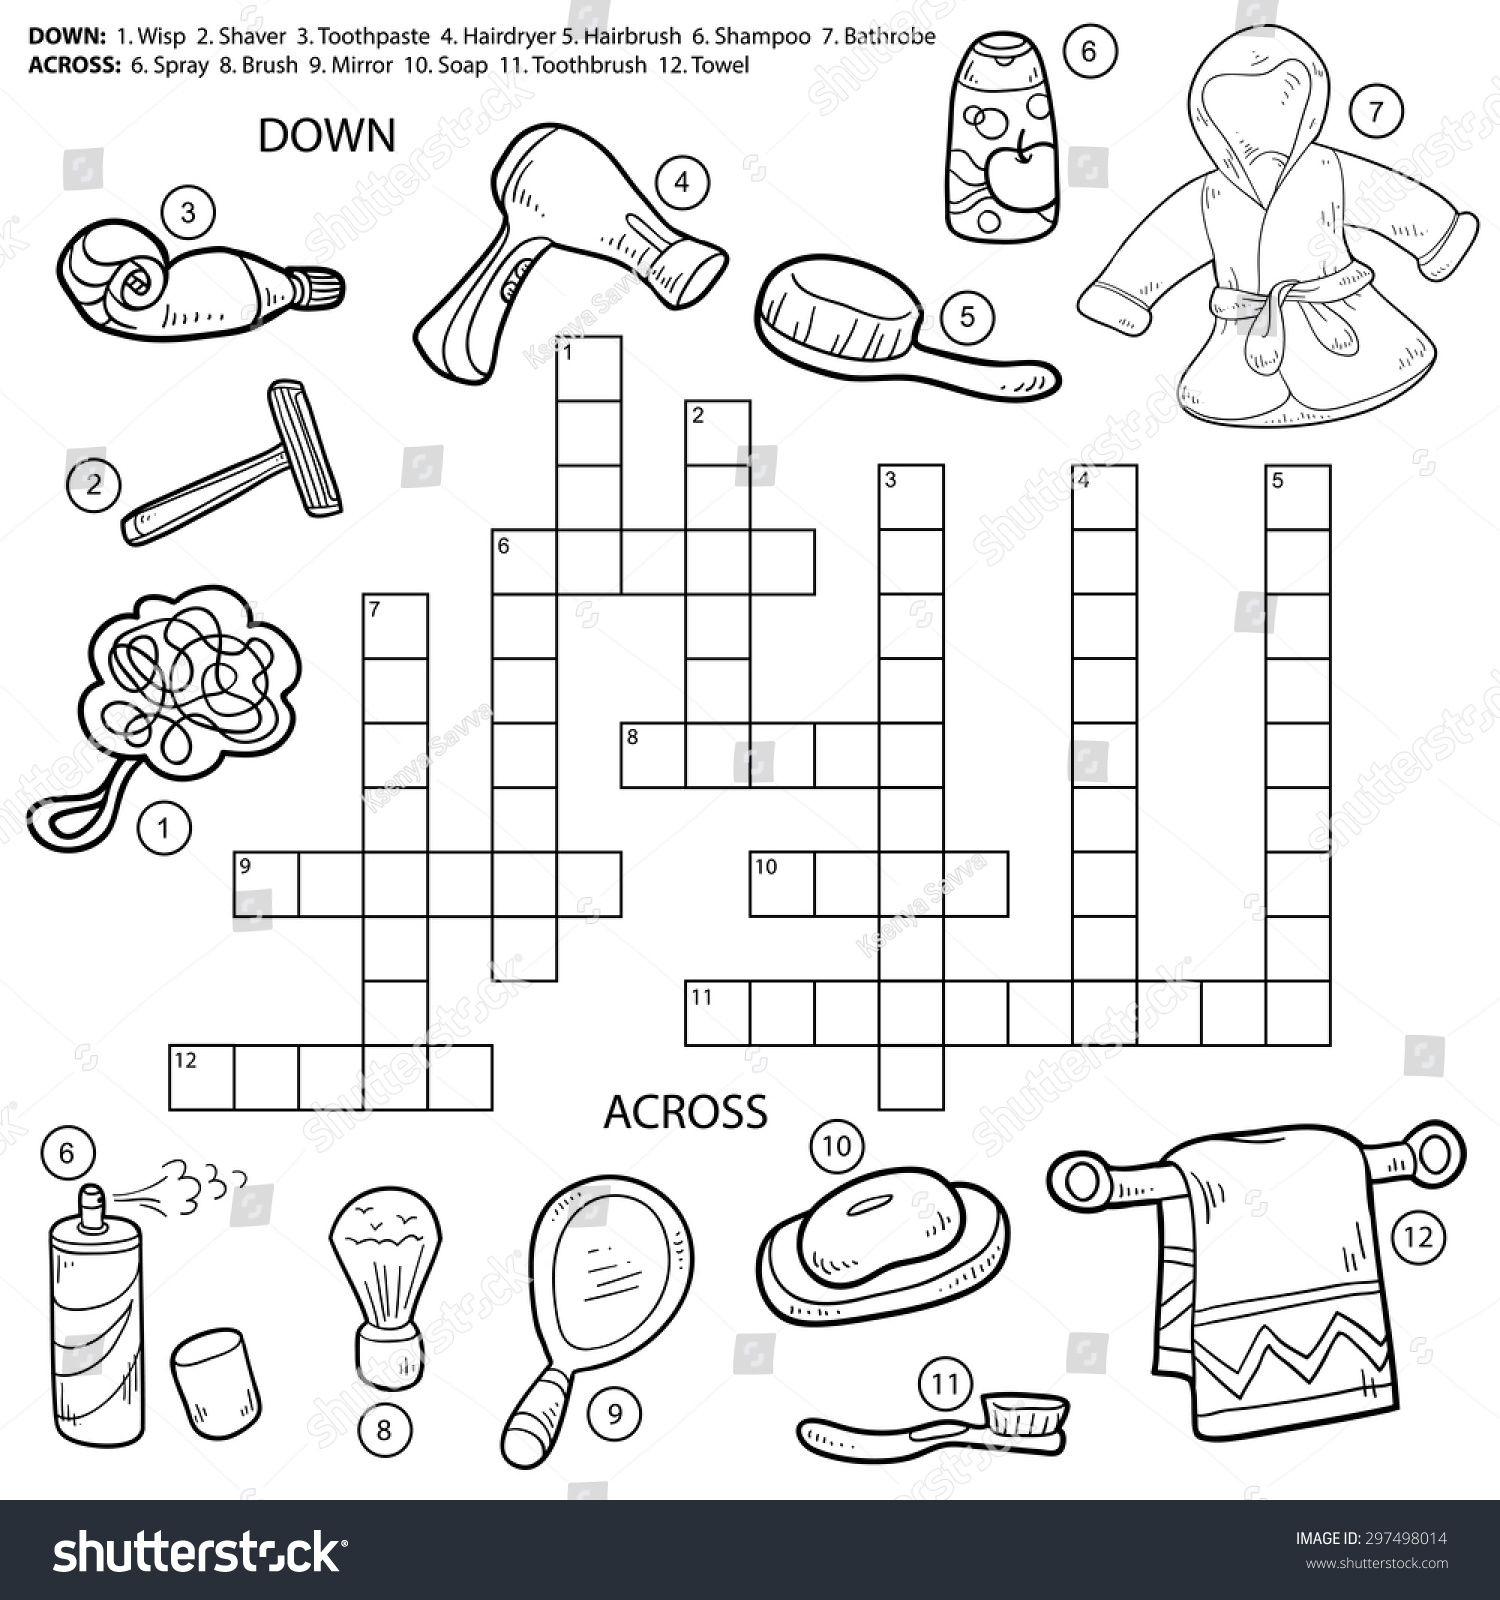 SVG of Vector colorless crossword, education game for children about bathroom and beauty items (wisp, shaver, toothpaste, hairdryer, hairbrush, shampoo, bathrobe, spray, mirror, soap, towel) svg